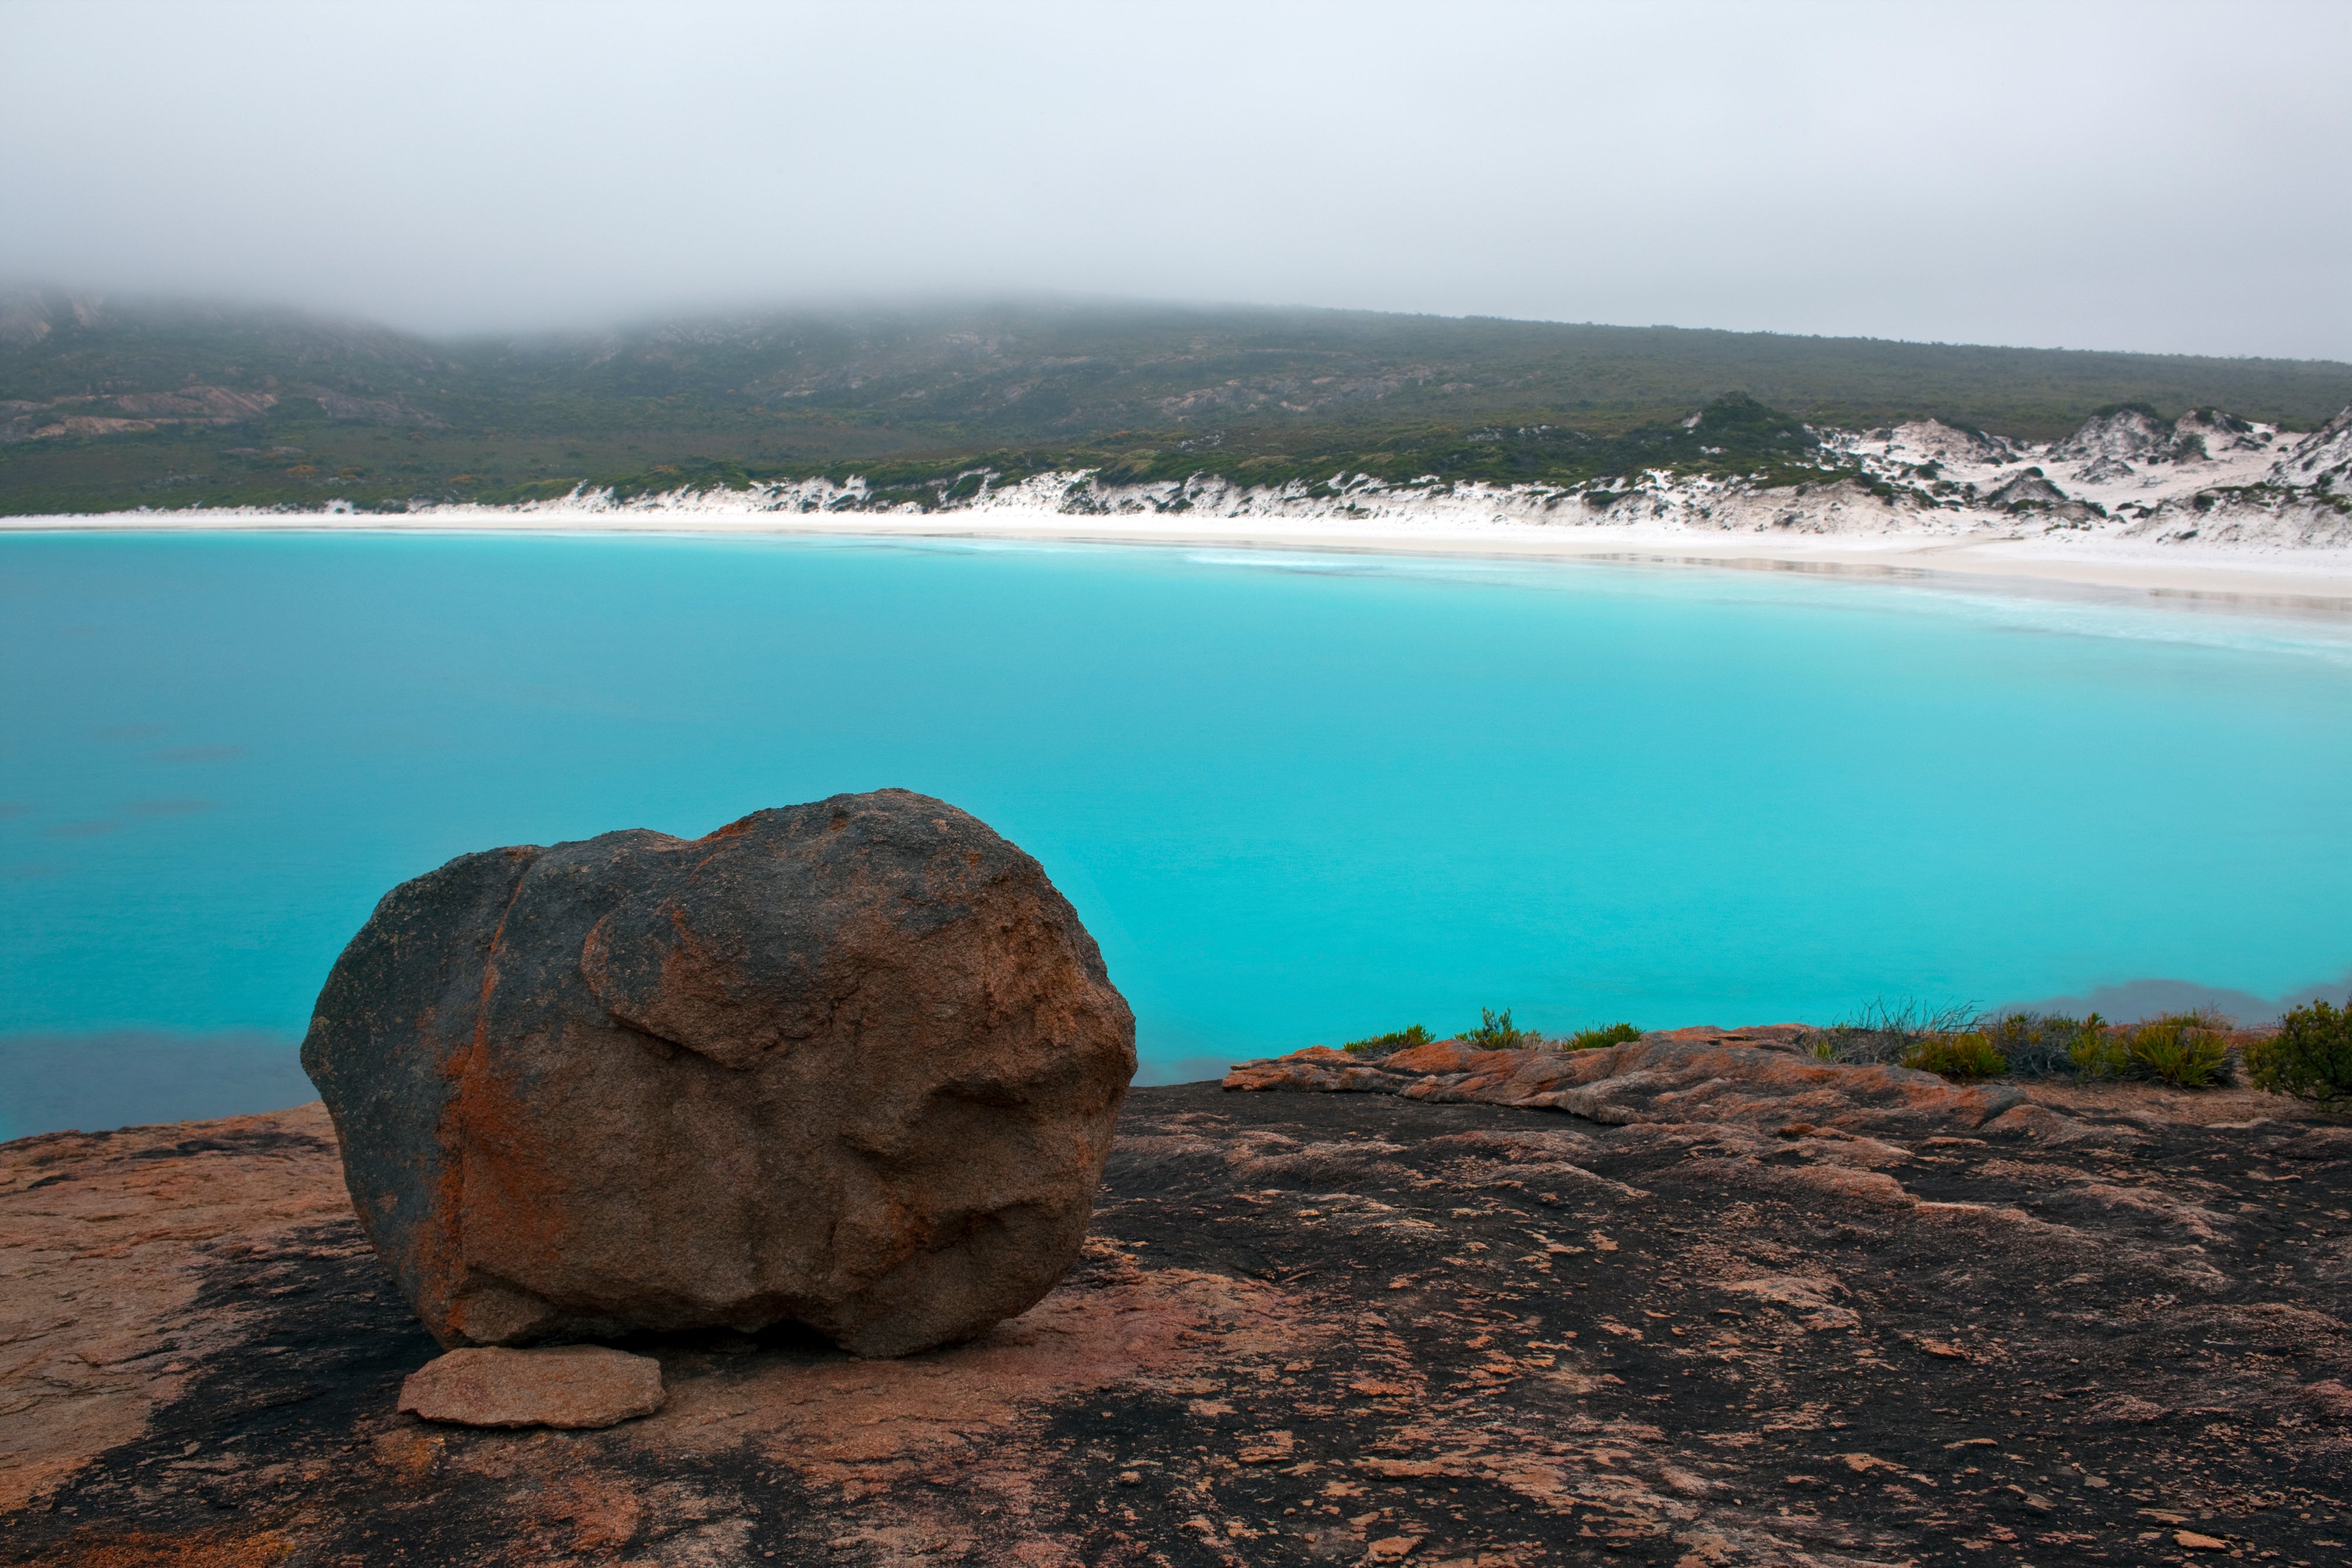 Nestled between granite rock shelves, Little Hellfire Bay is a dream for secluded swims and BBQs